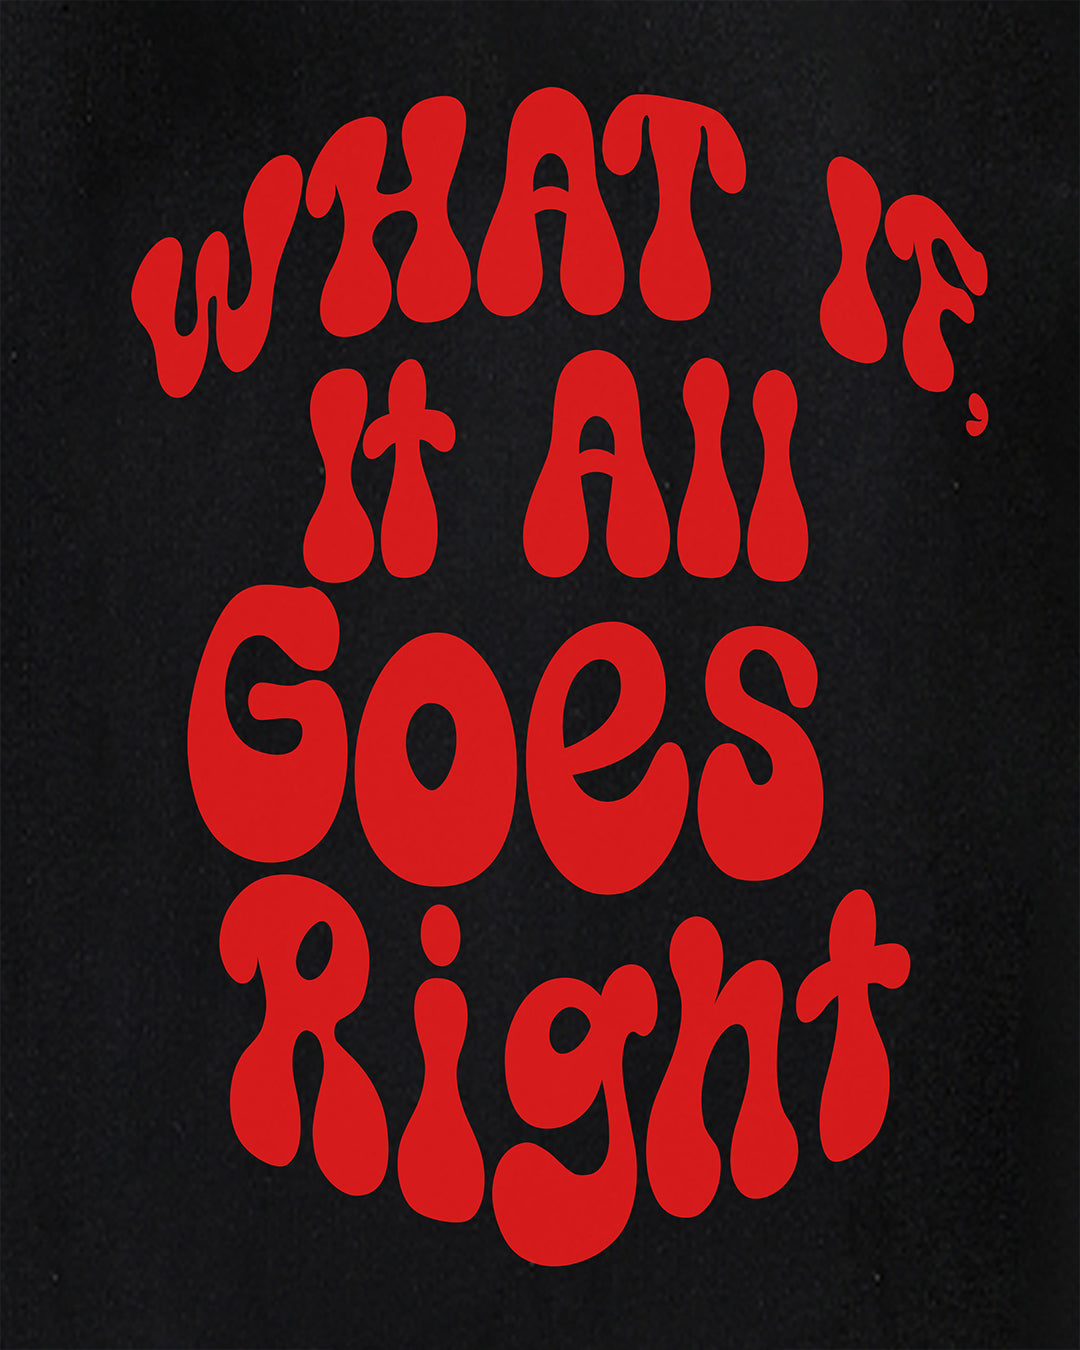 What If It All Goes Right Oversized Men's Tshirt